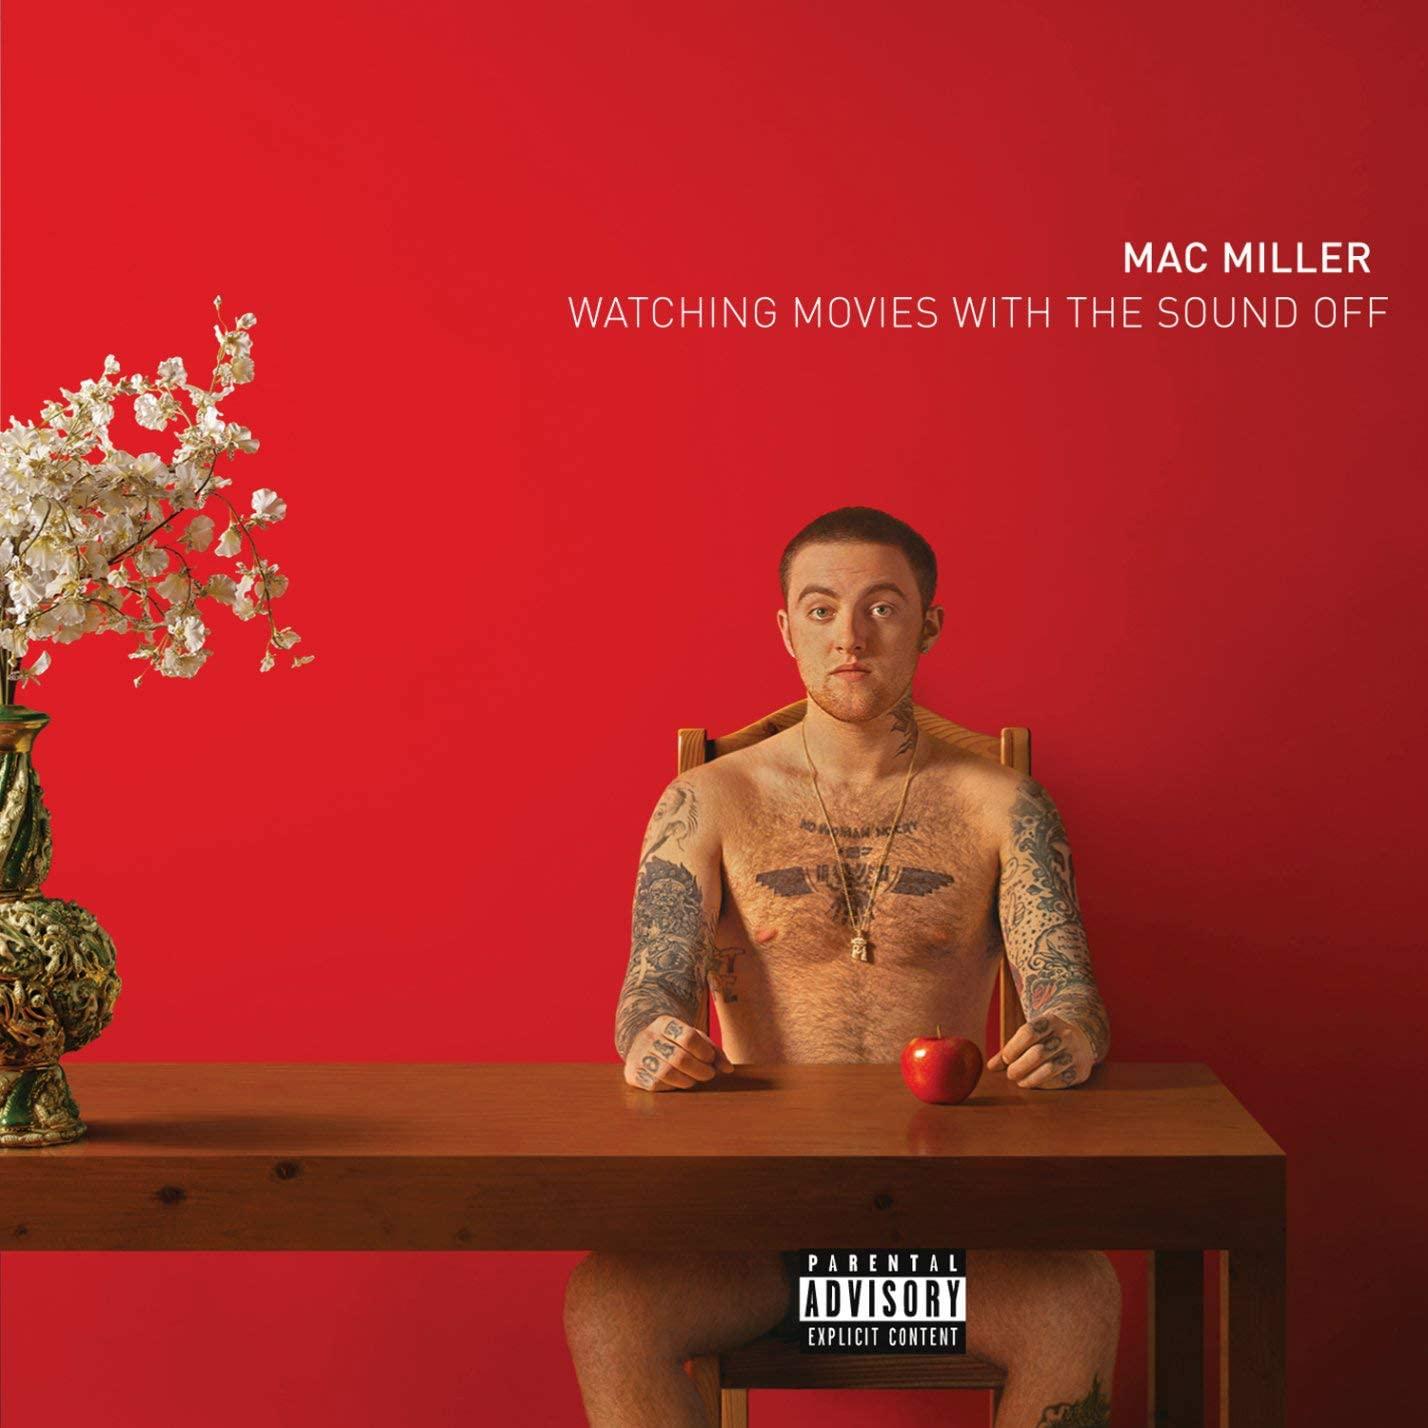 Mac Miller - Watching Movies With The Sound off (2013) 2LP